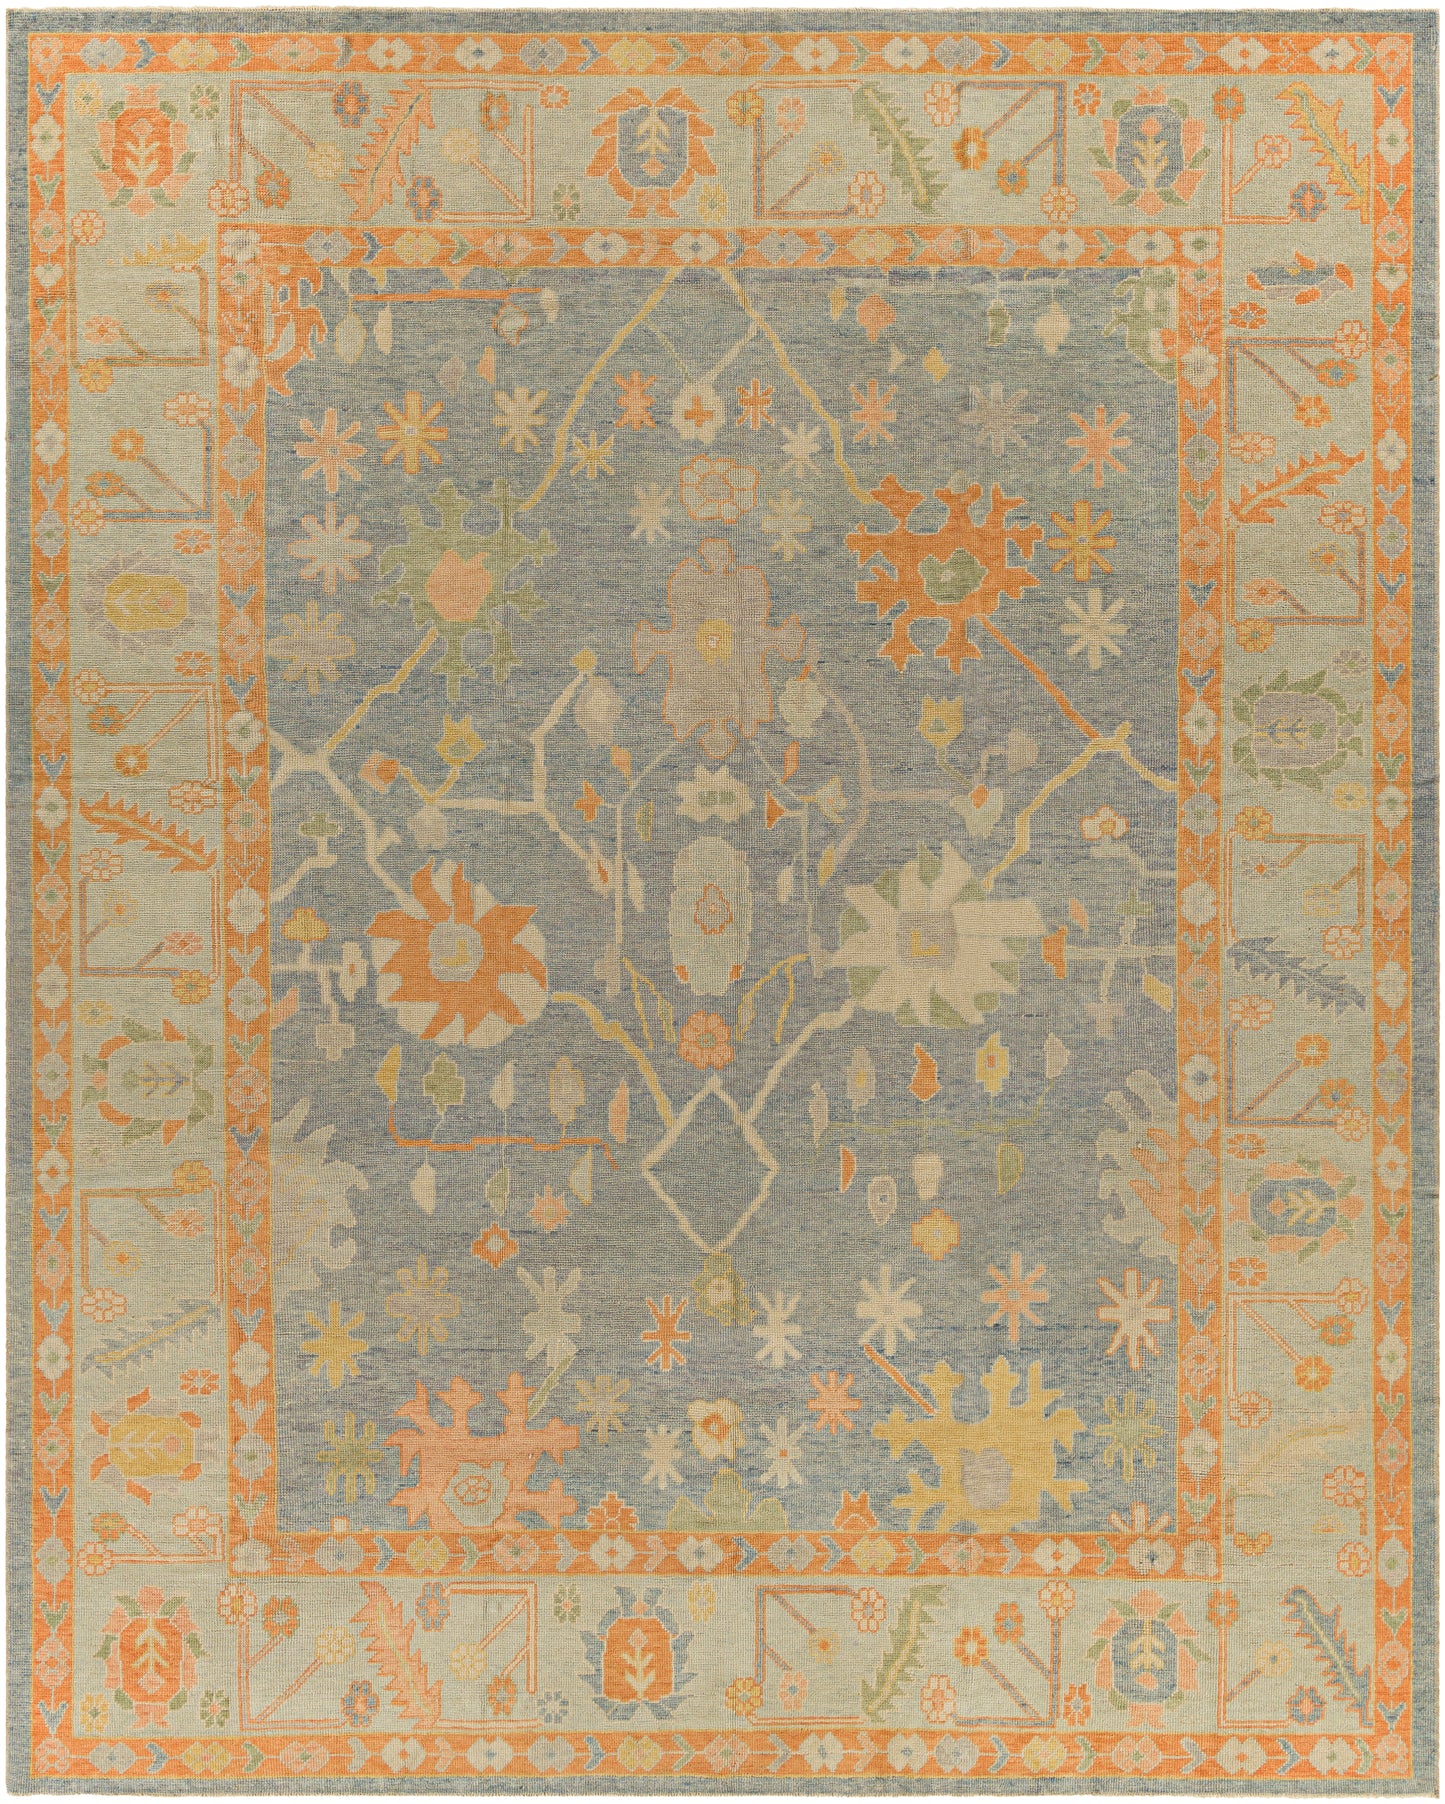 Antique One of a Kind 29836 Hand Knotted Wool Indoor Area Rug by Surya Rugs